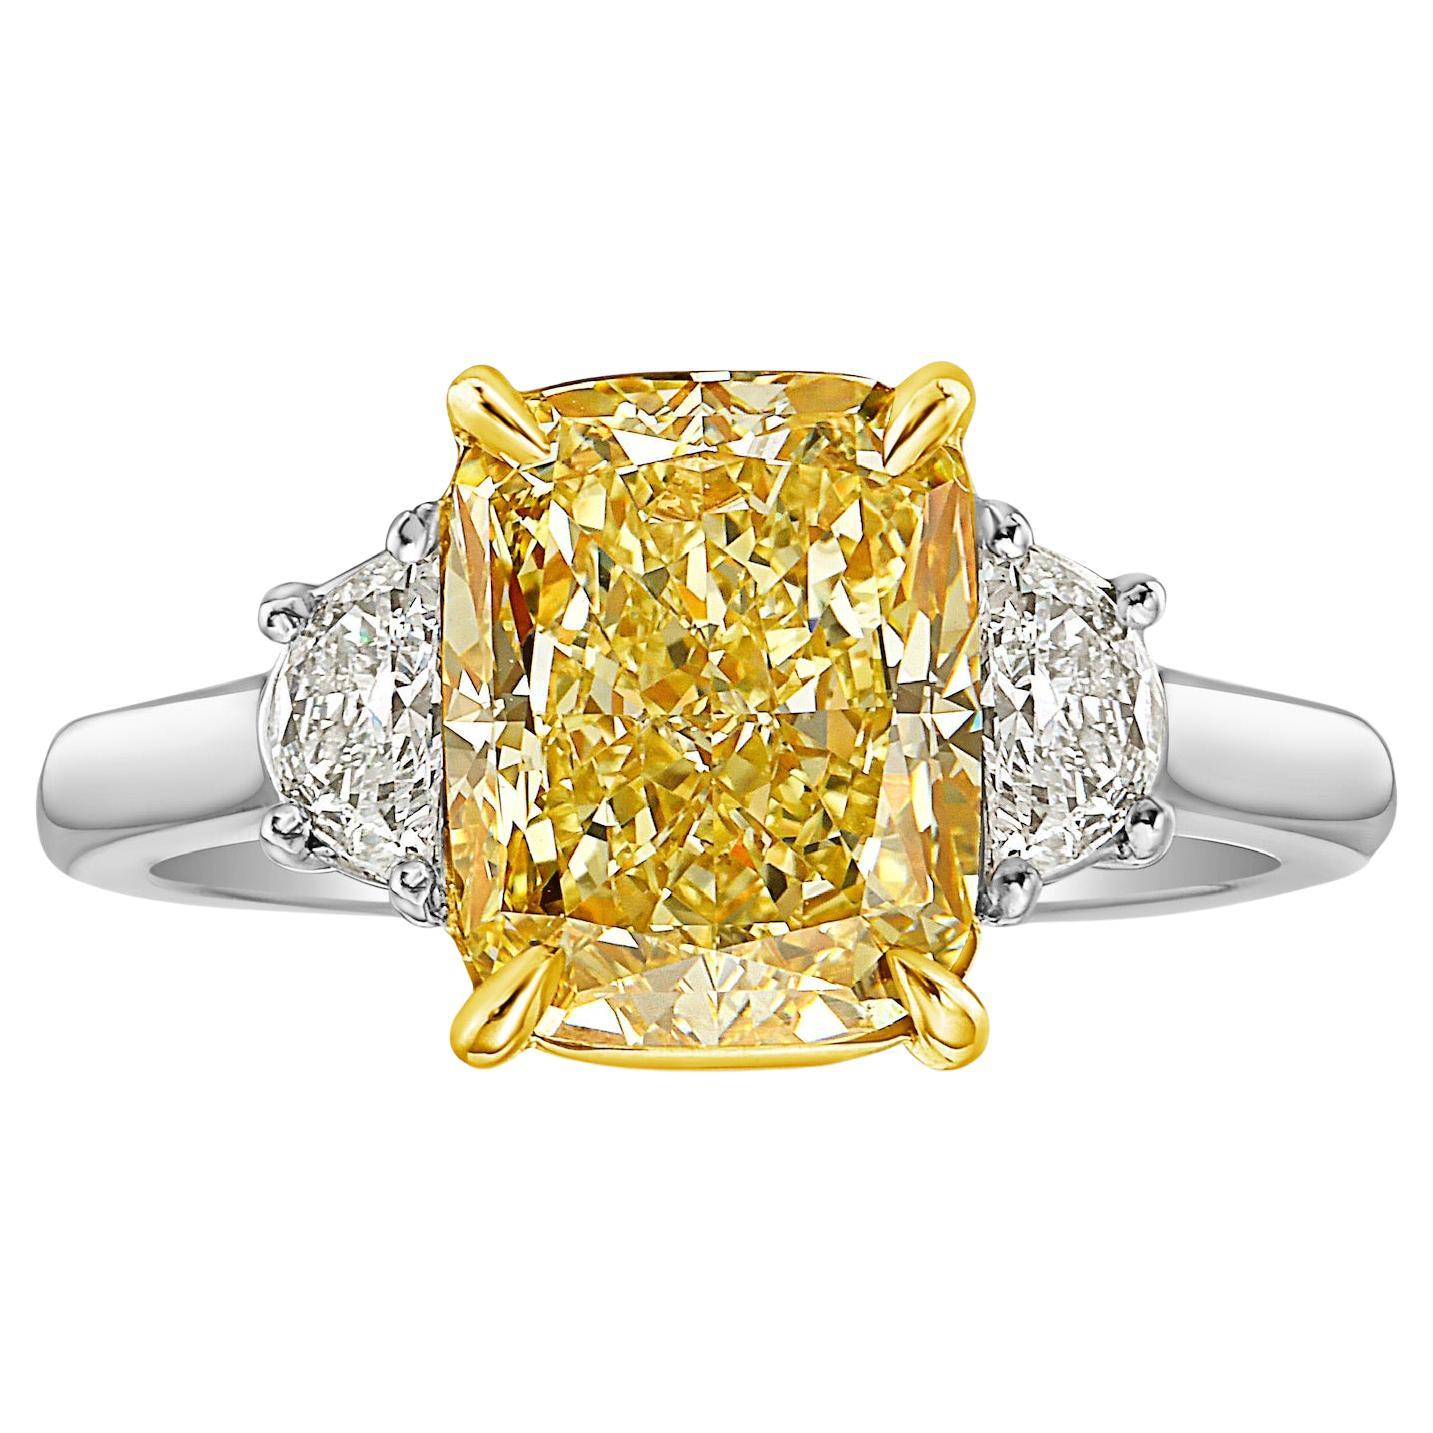 3.48ct VVS1 Fancy Yellow Cushion Diamond Engagement Ring For Sale